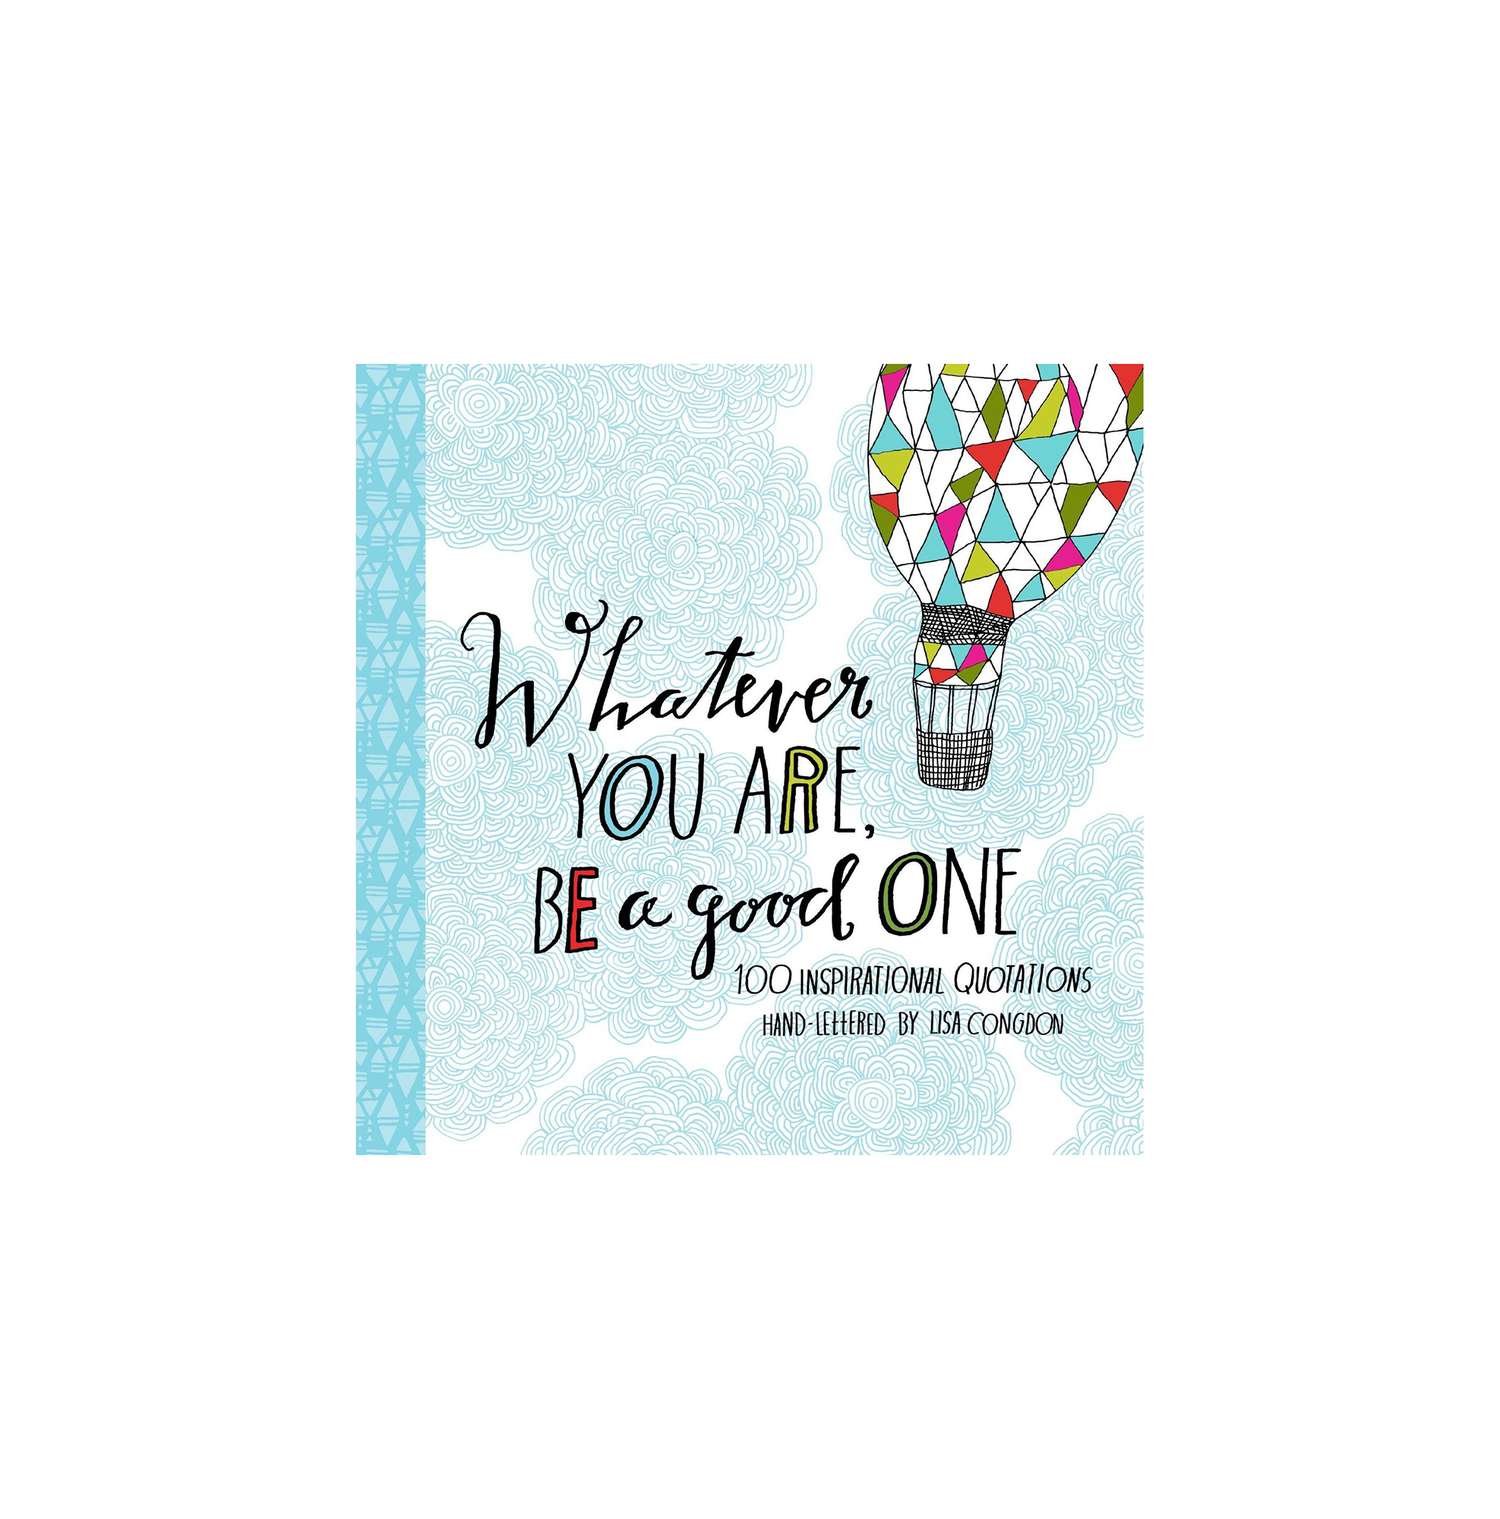 Whatever You Are, Be a Good One, by Lisa Congdon